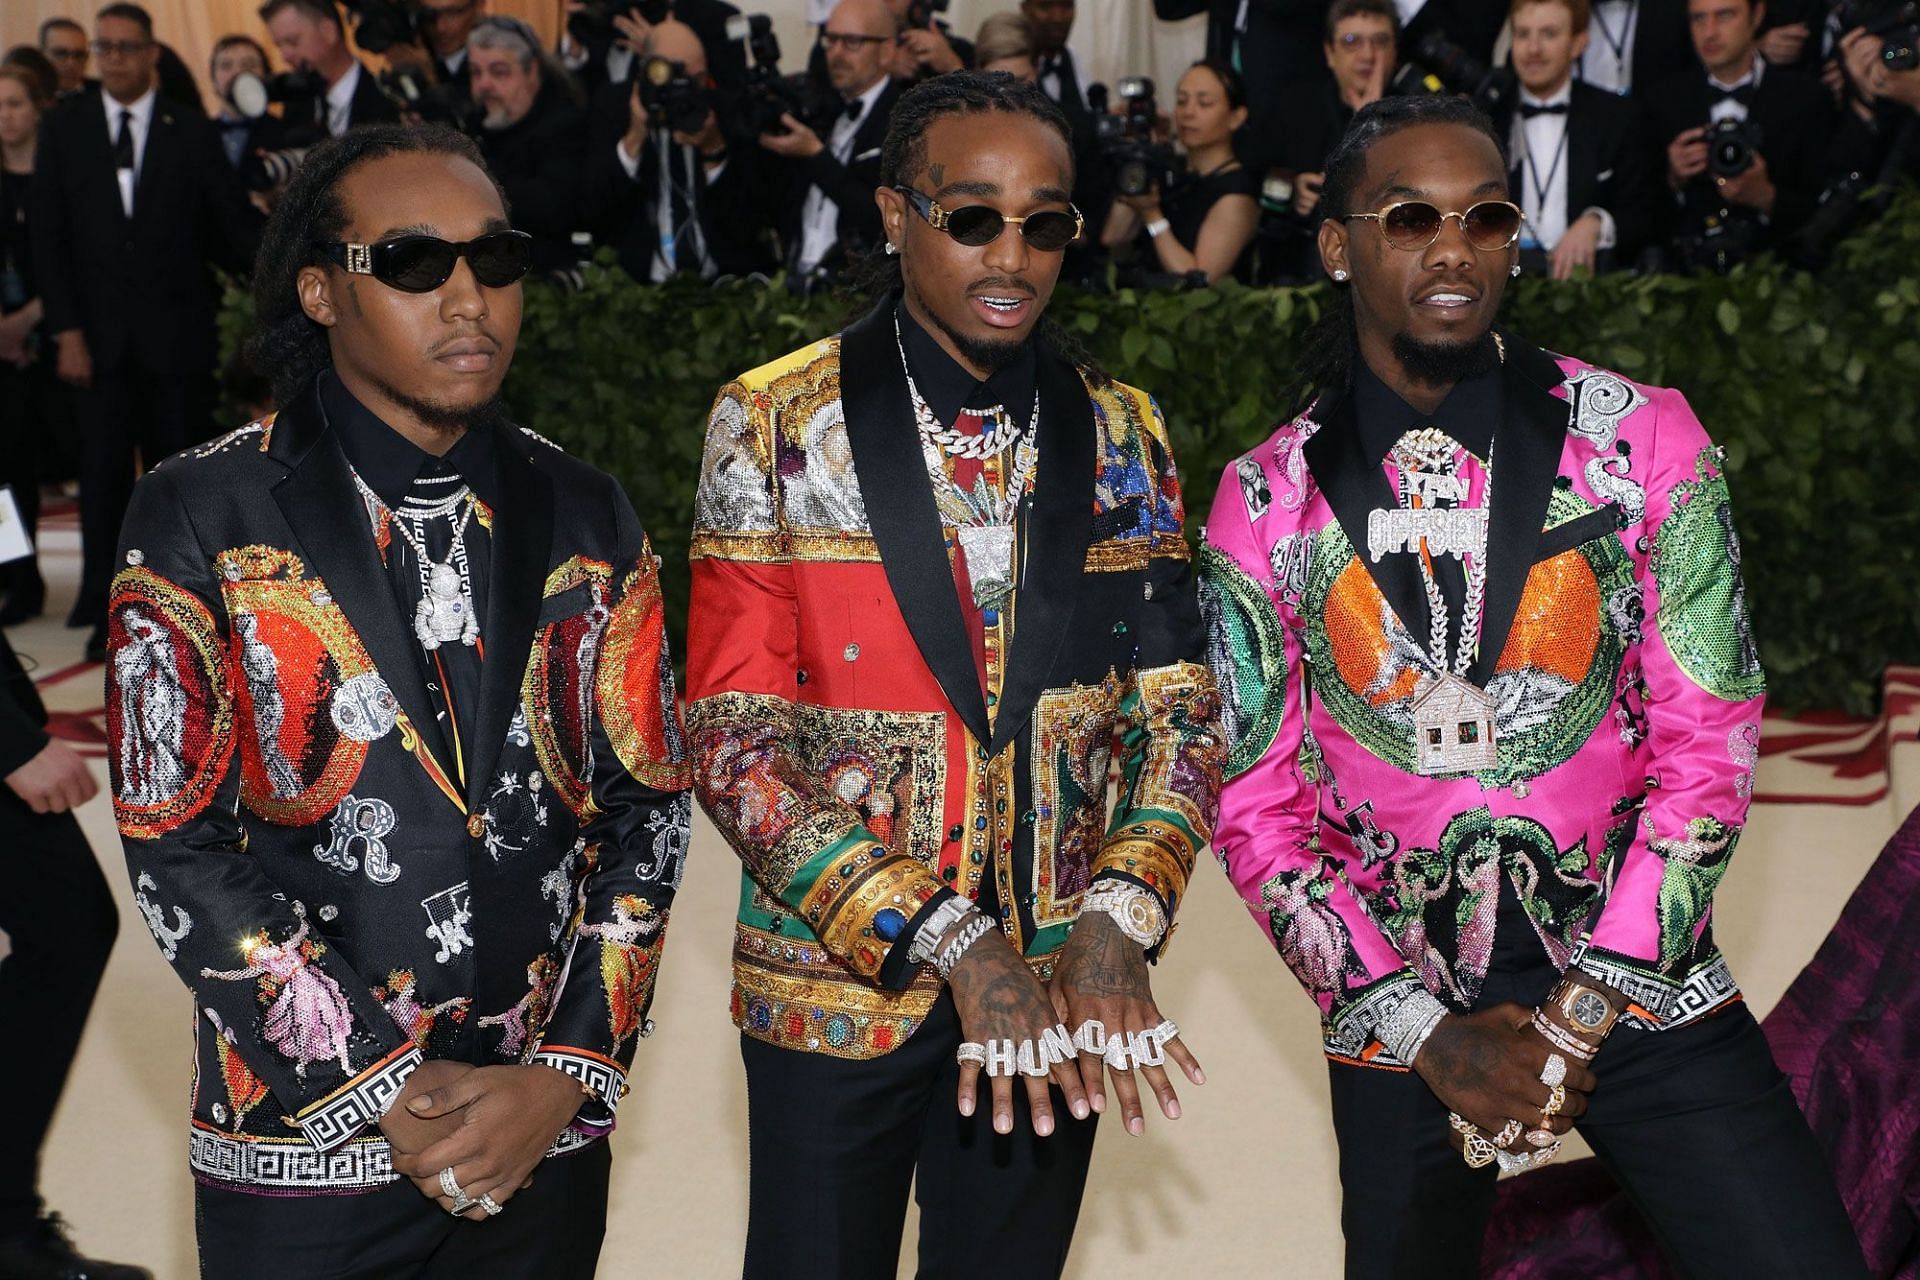 Migos at the 2018 MET Gala (Image via Getty/unknown)